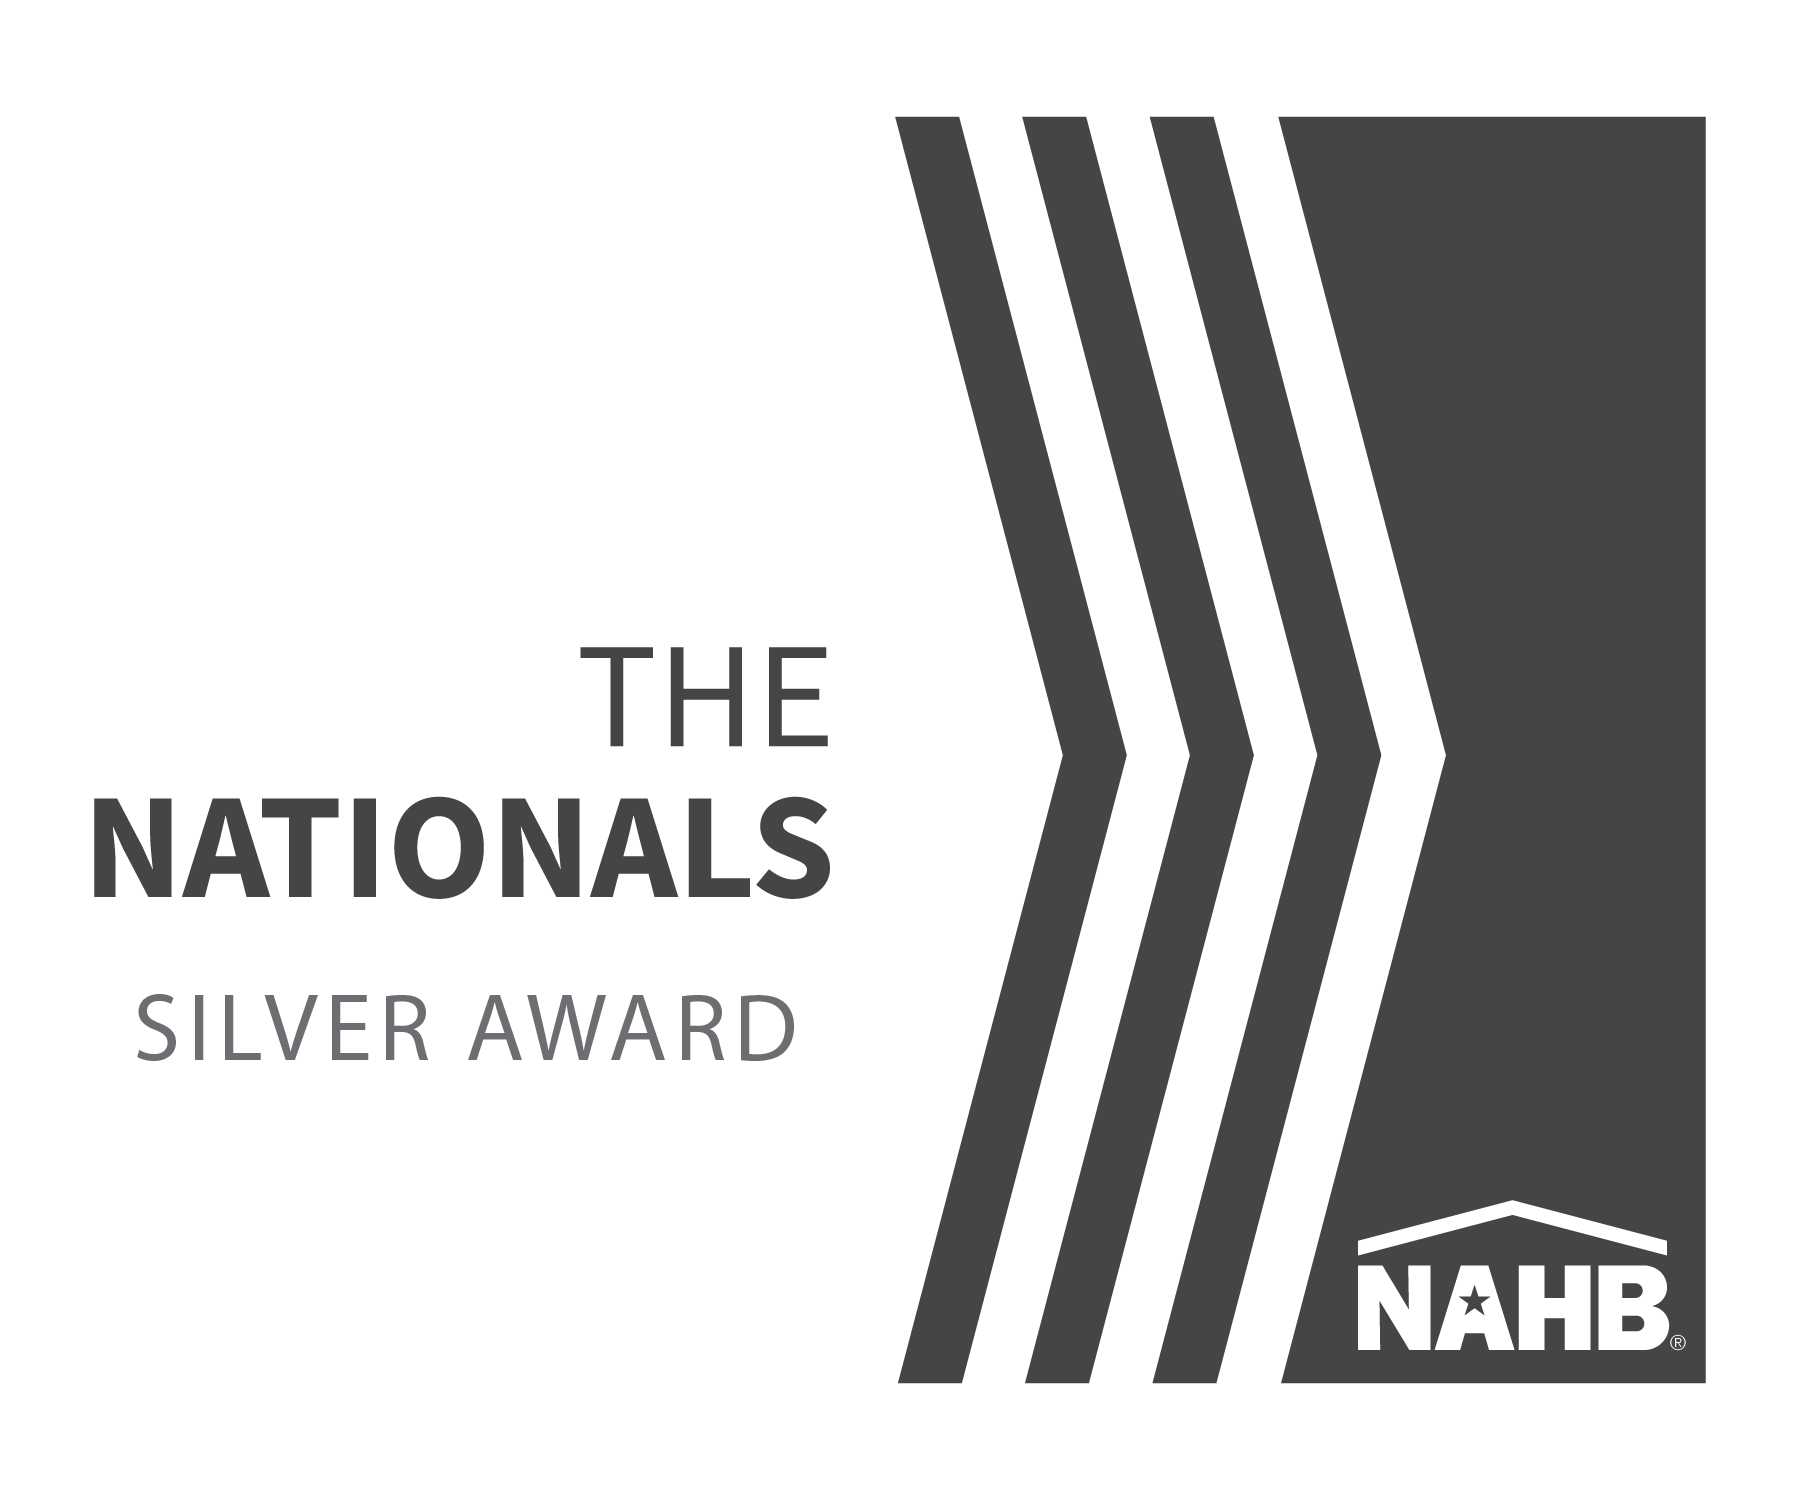 The Nationals salutes and honours the best in the building industry for their determination, integrity, creativity, and endurance.